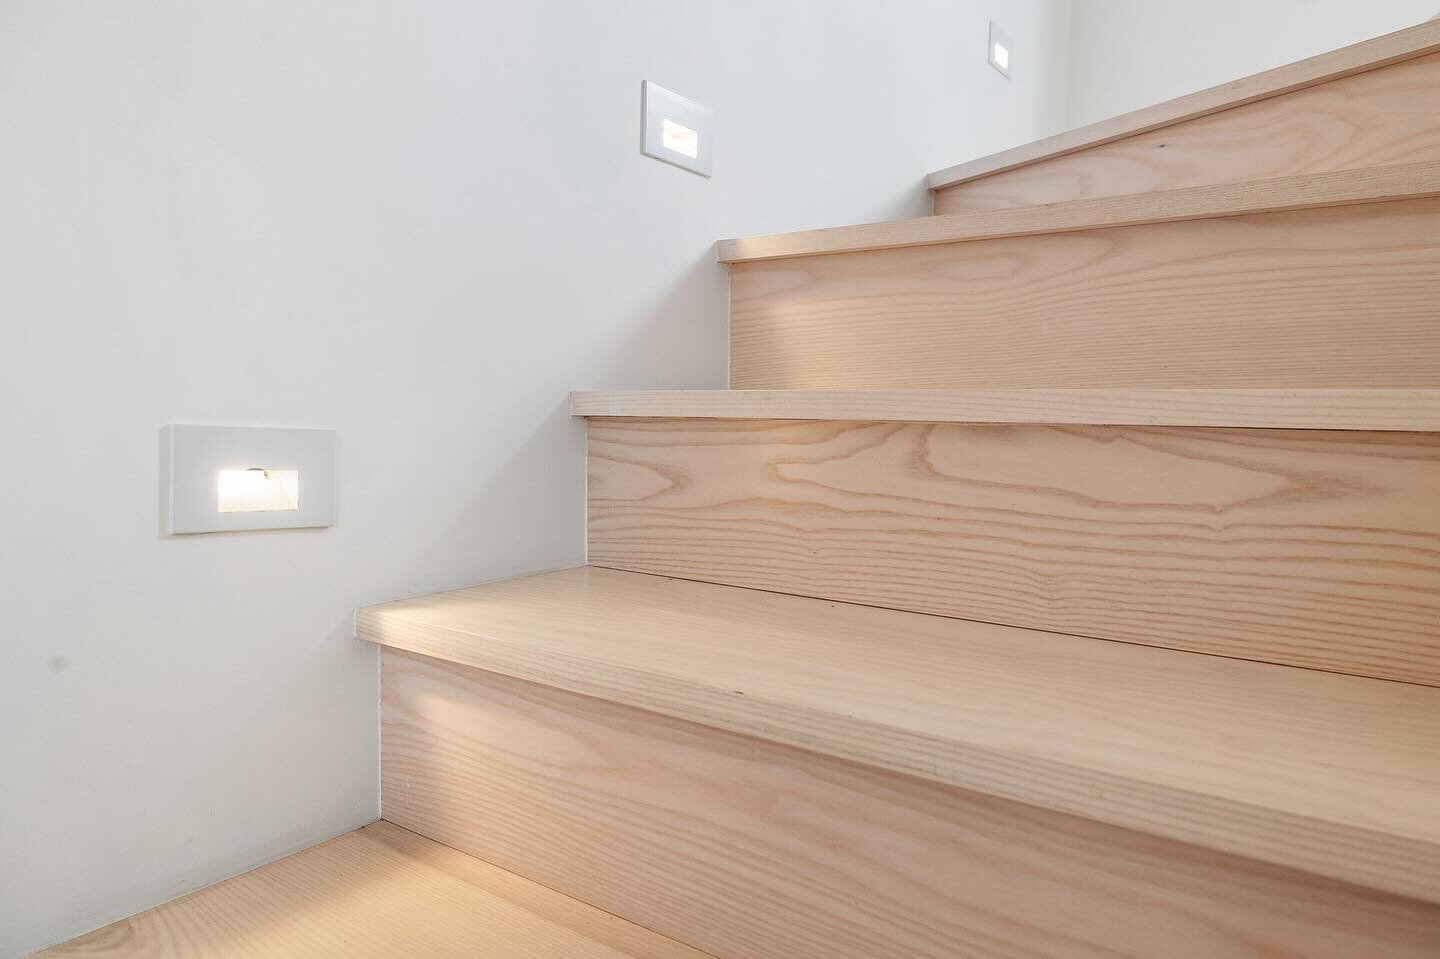 Details: whitewashed oak treads in the stairway leading up to the main bedroom.

See more of this home: #WaybackCottage 

#BlueTruckStudio #ResidentialDesign #SanFranciscoArchitect #SanFranciscoArchitecture #CaliforniaArchitect #CaliforniaArchitectur